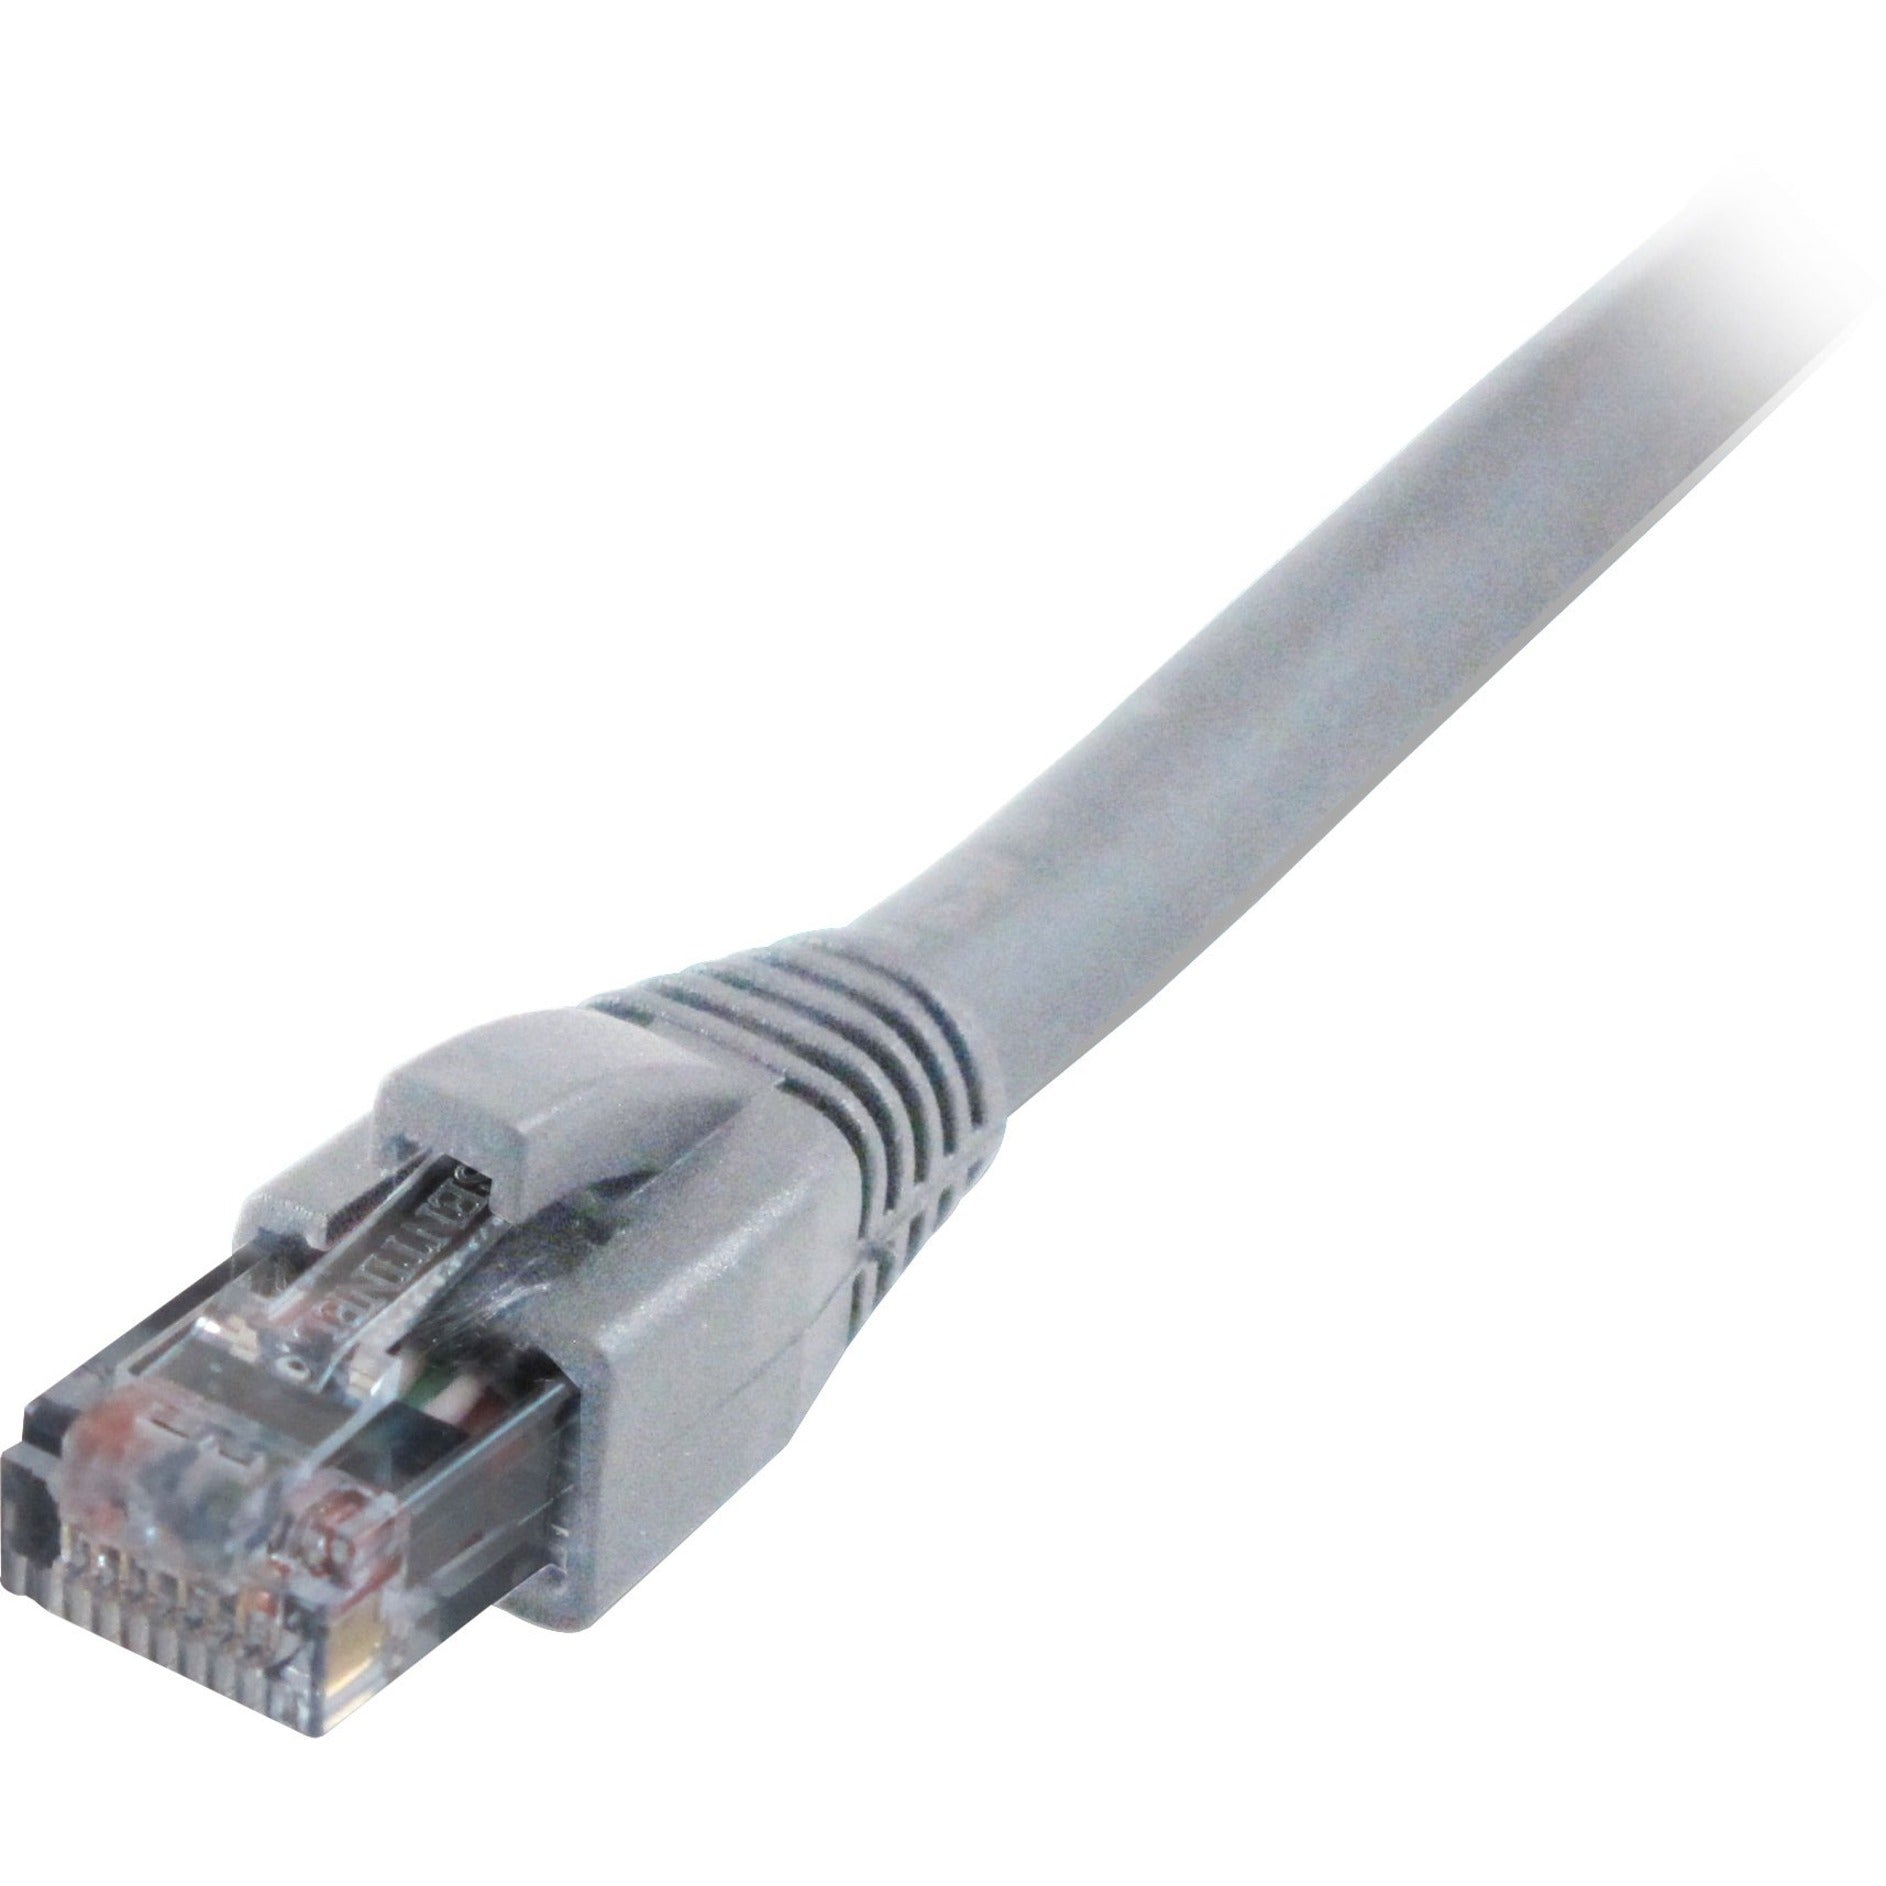 Comprehensive CAT6-7GRY-USA Cat6 Snagless Patch Cable 7ft Grey, Lifetime Warranty, TAA Compliant